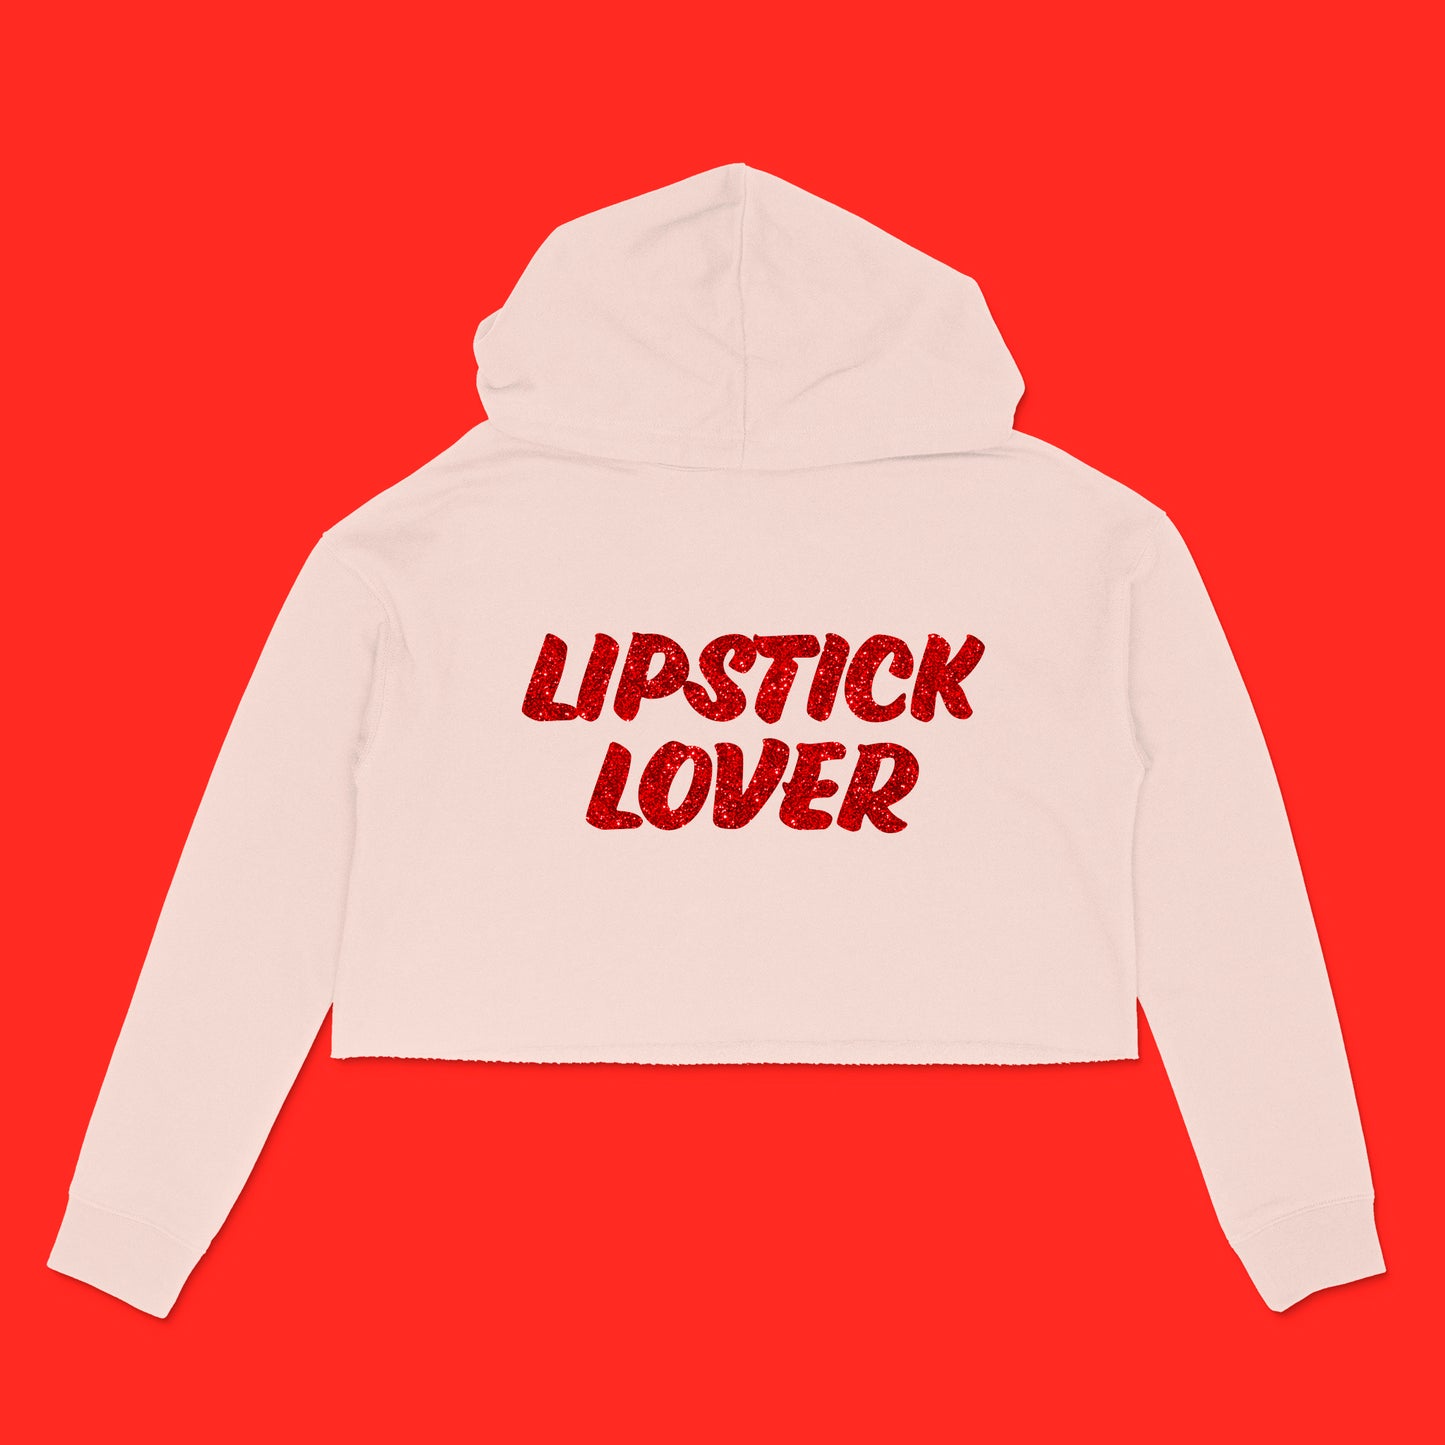 Custom text blush cropped hooded sweatshirt with "Lipstick Lover" in red glitter brush text by BBJ / Glitter Garage